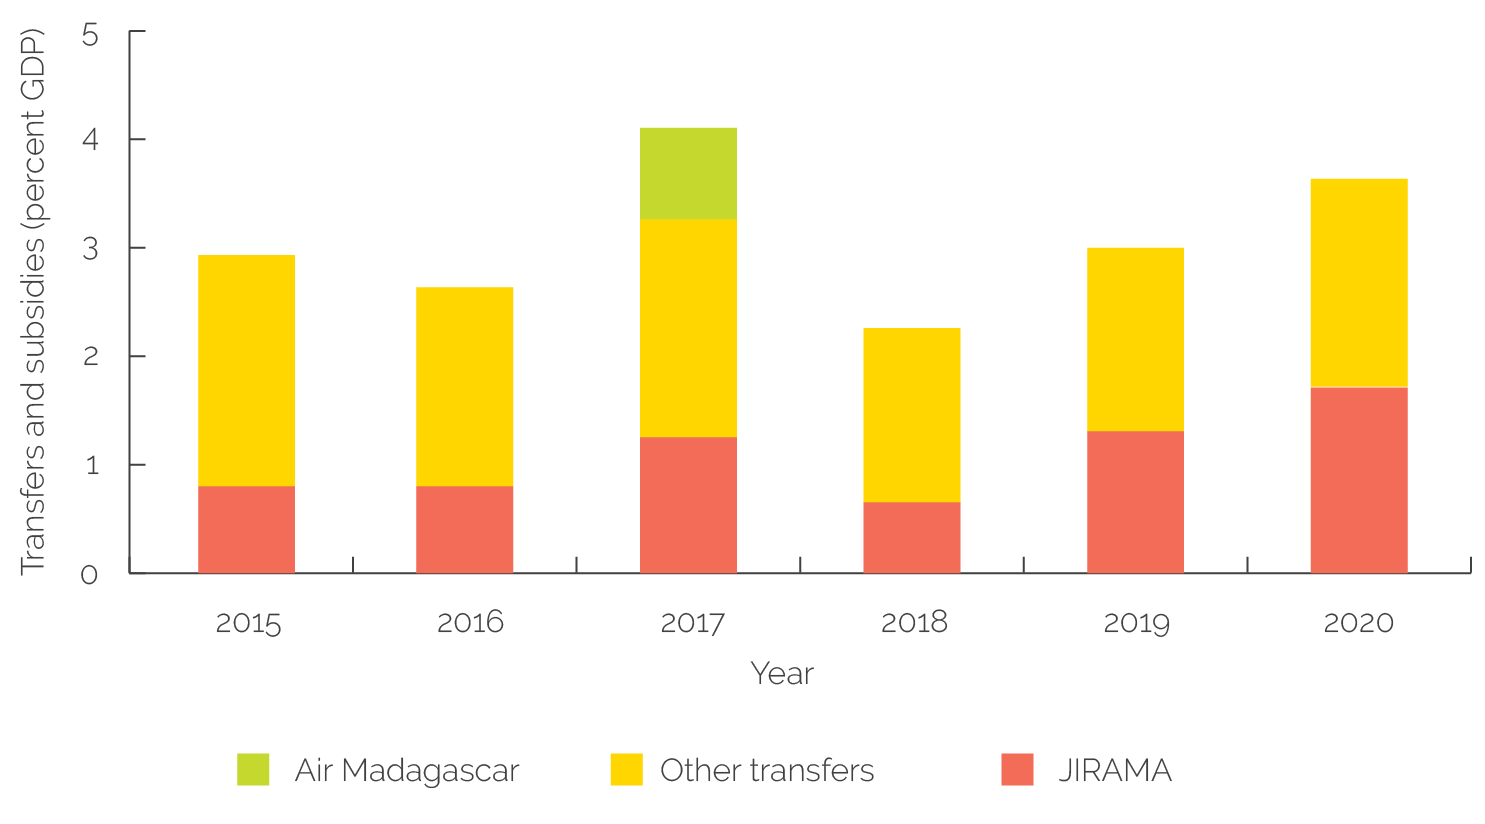 A bar graph showing the breakdown of Madagascar transfers and subsidies to SOEs over time, which hover around 3 percent of GDP.